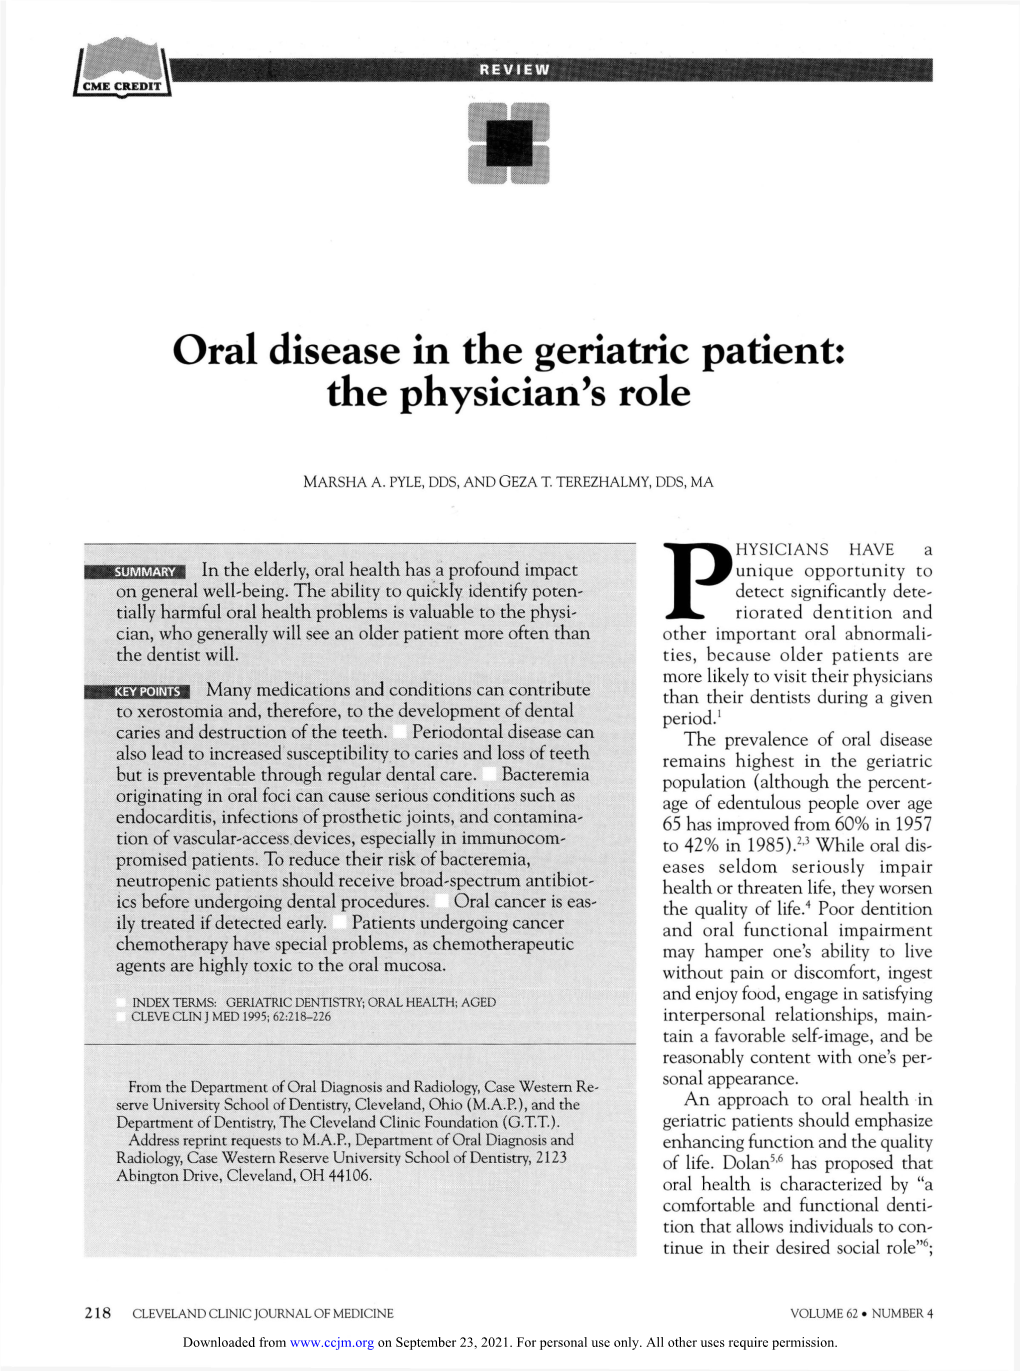 Oral Disease in the Geriatric Patient: the Physician's Role